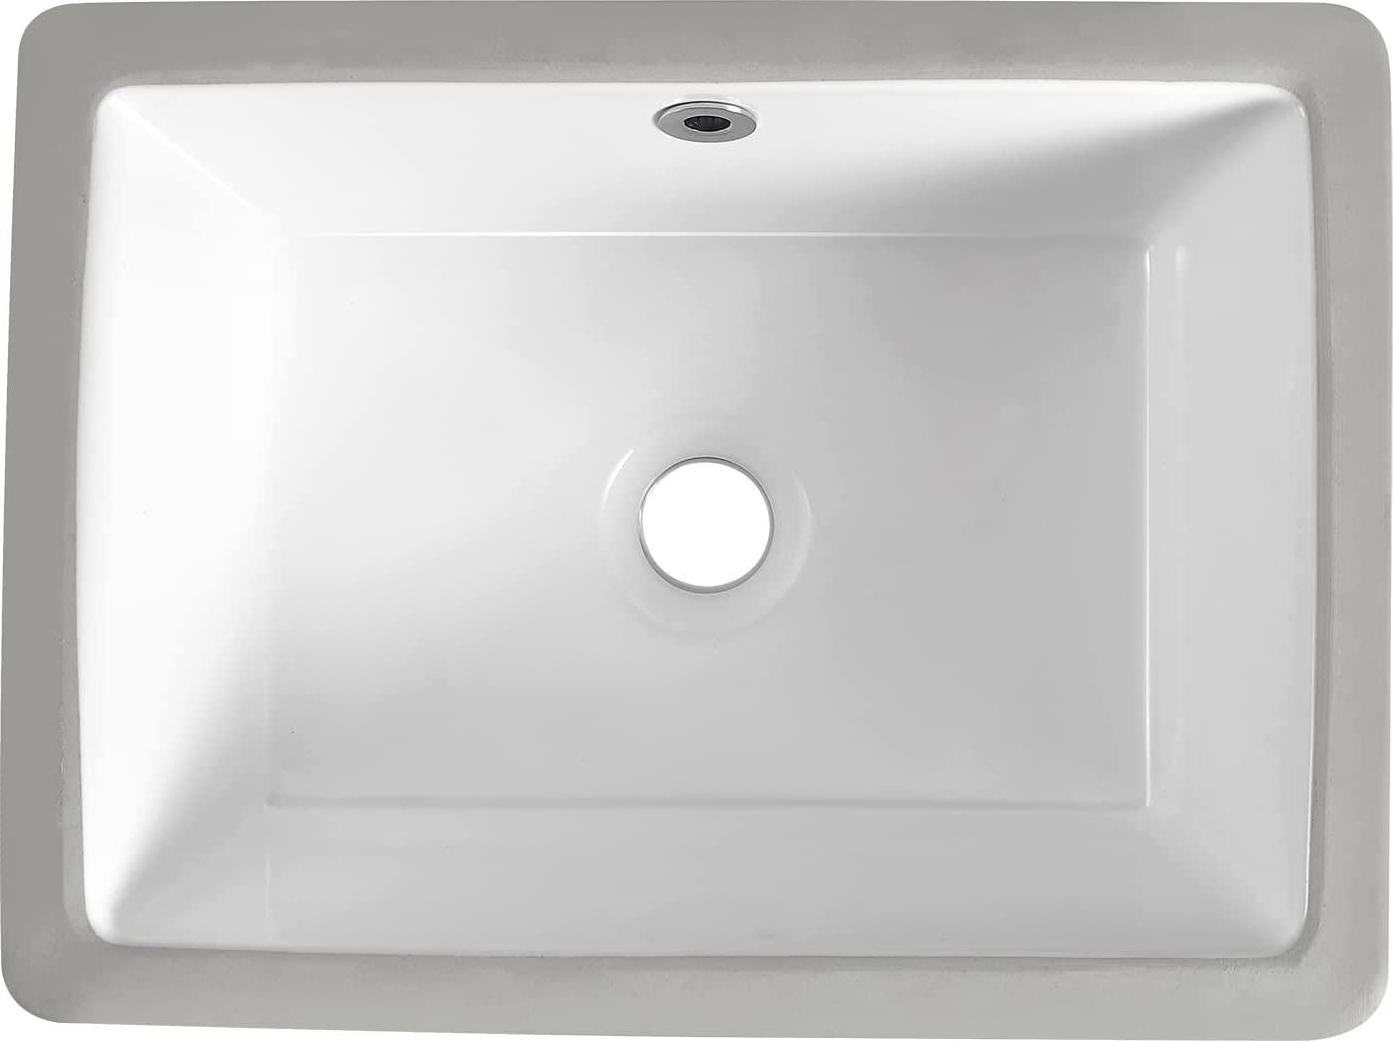 16 Inch Undermount Bathroom Sink Small Rectangle Undermount Sink White Ceramic Under Counter Bathroom Sink with Overflow (15.70 x11.69 )